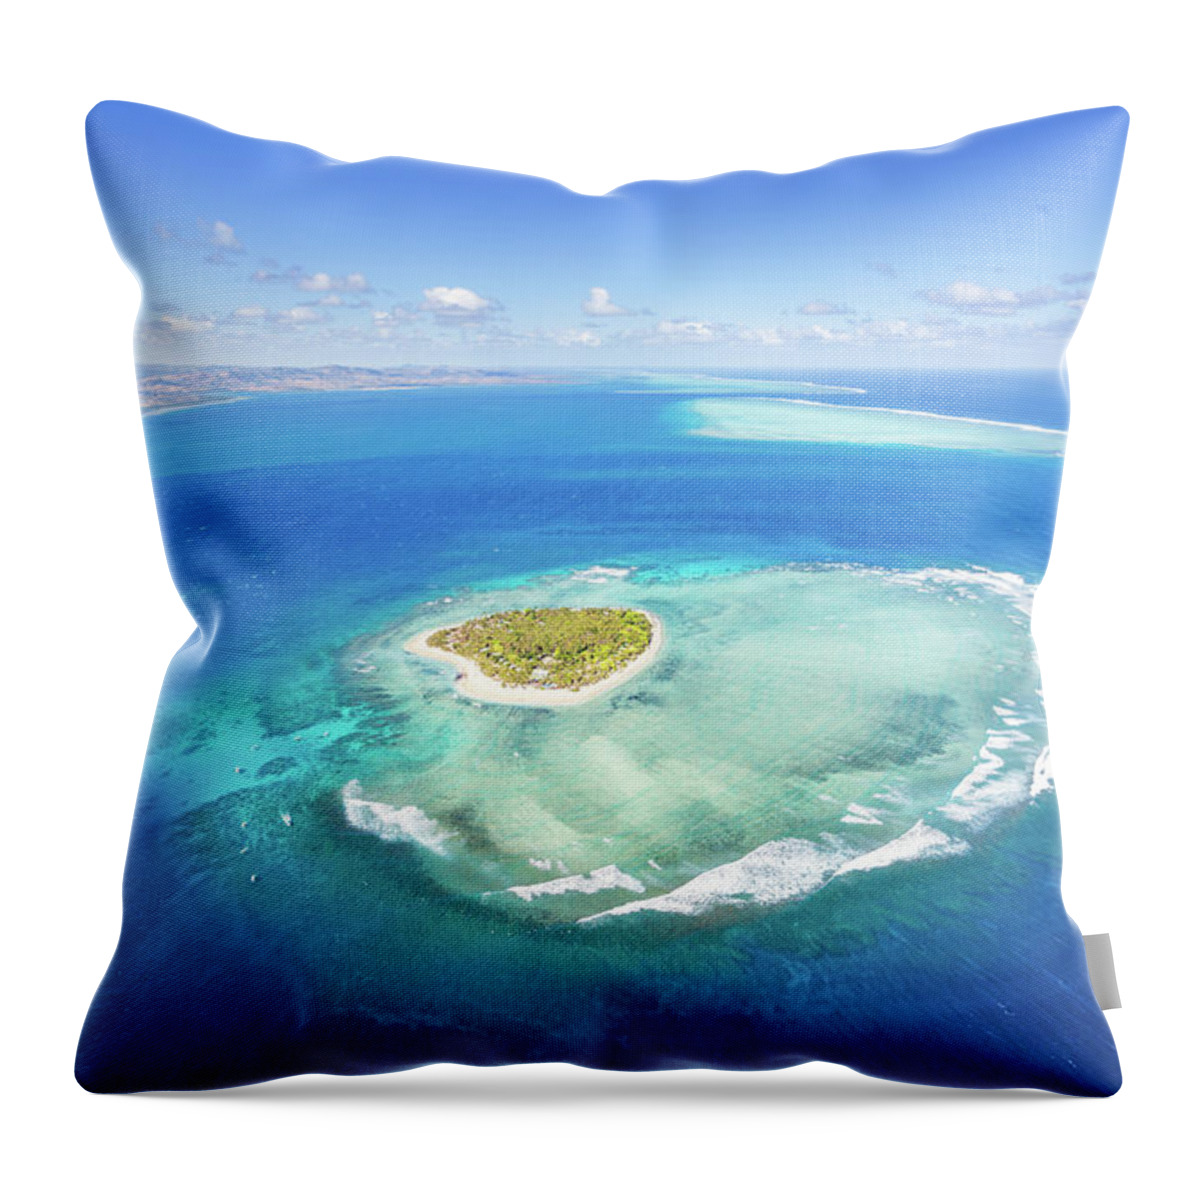 Tranquility Throw Pillow featuring the photograph Aerial View Of Heart Shaped Island by Matteo Colombo